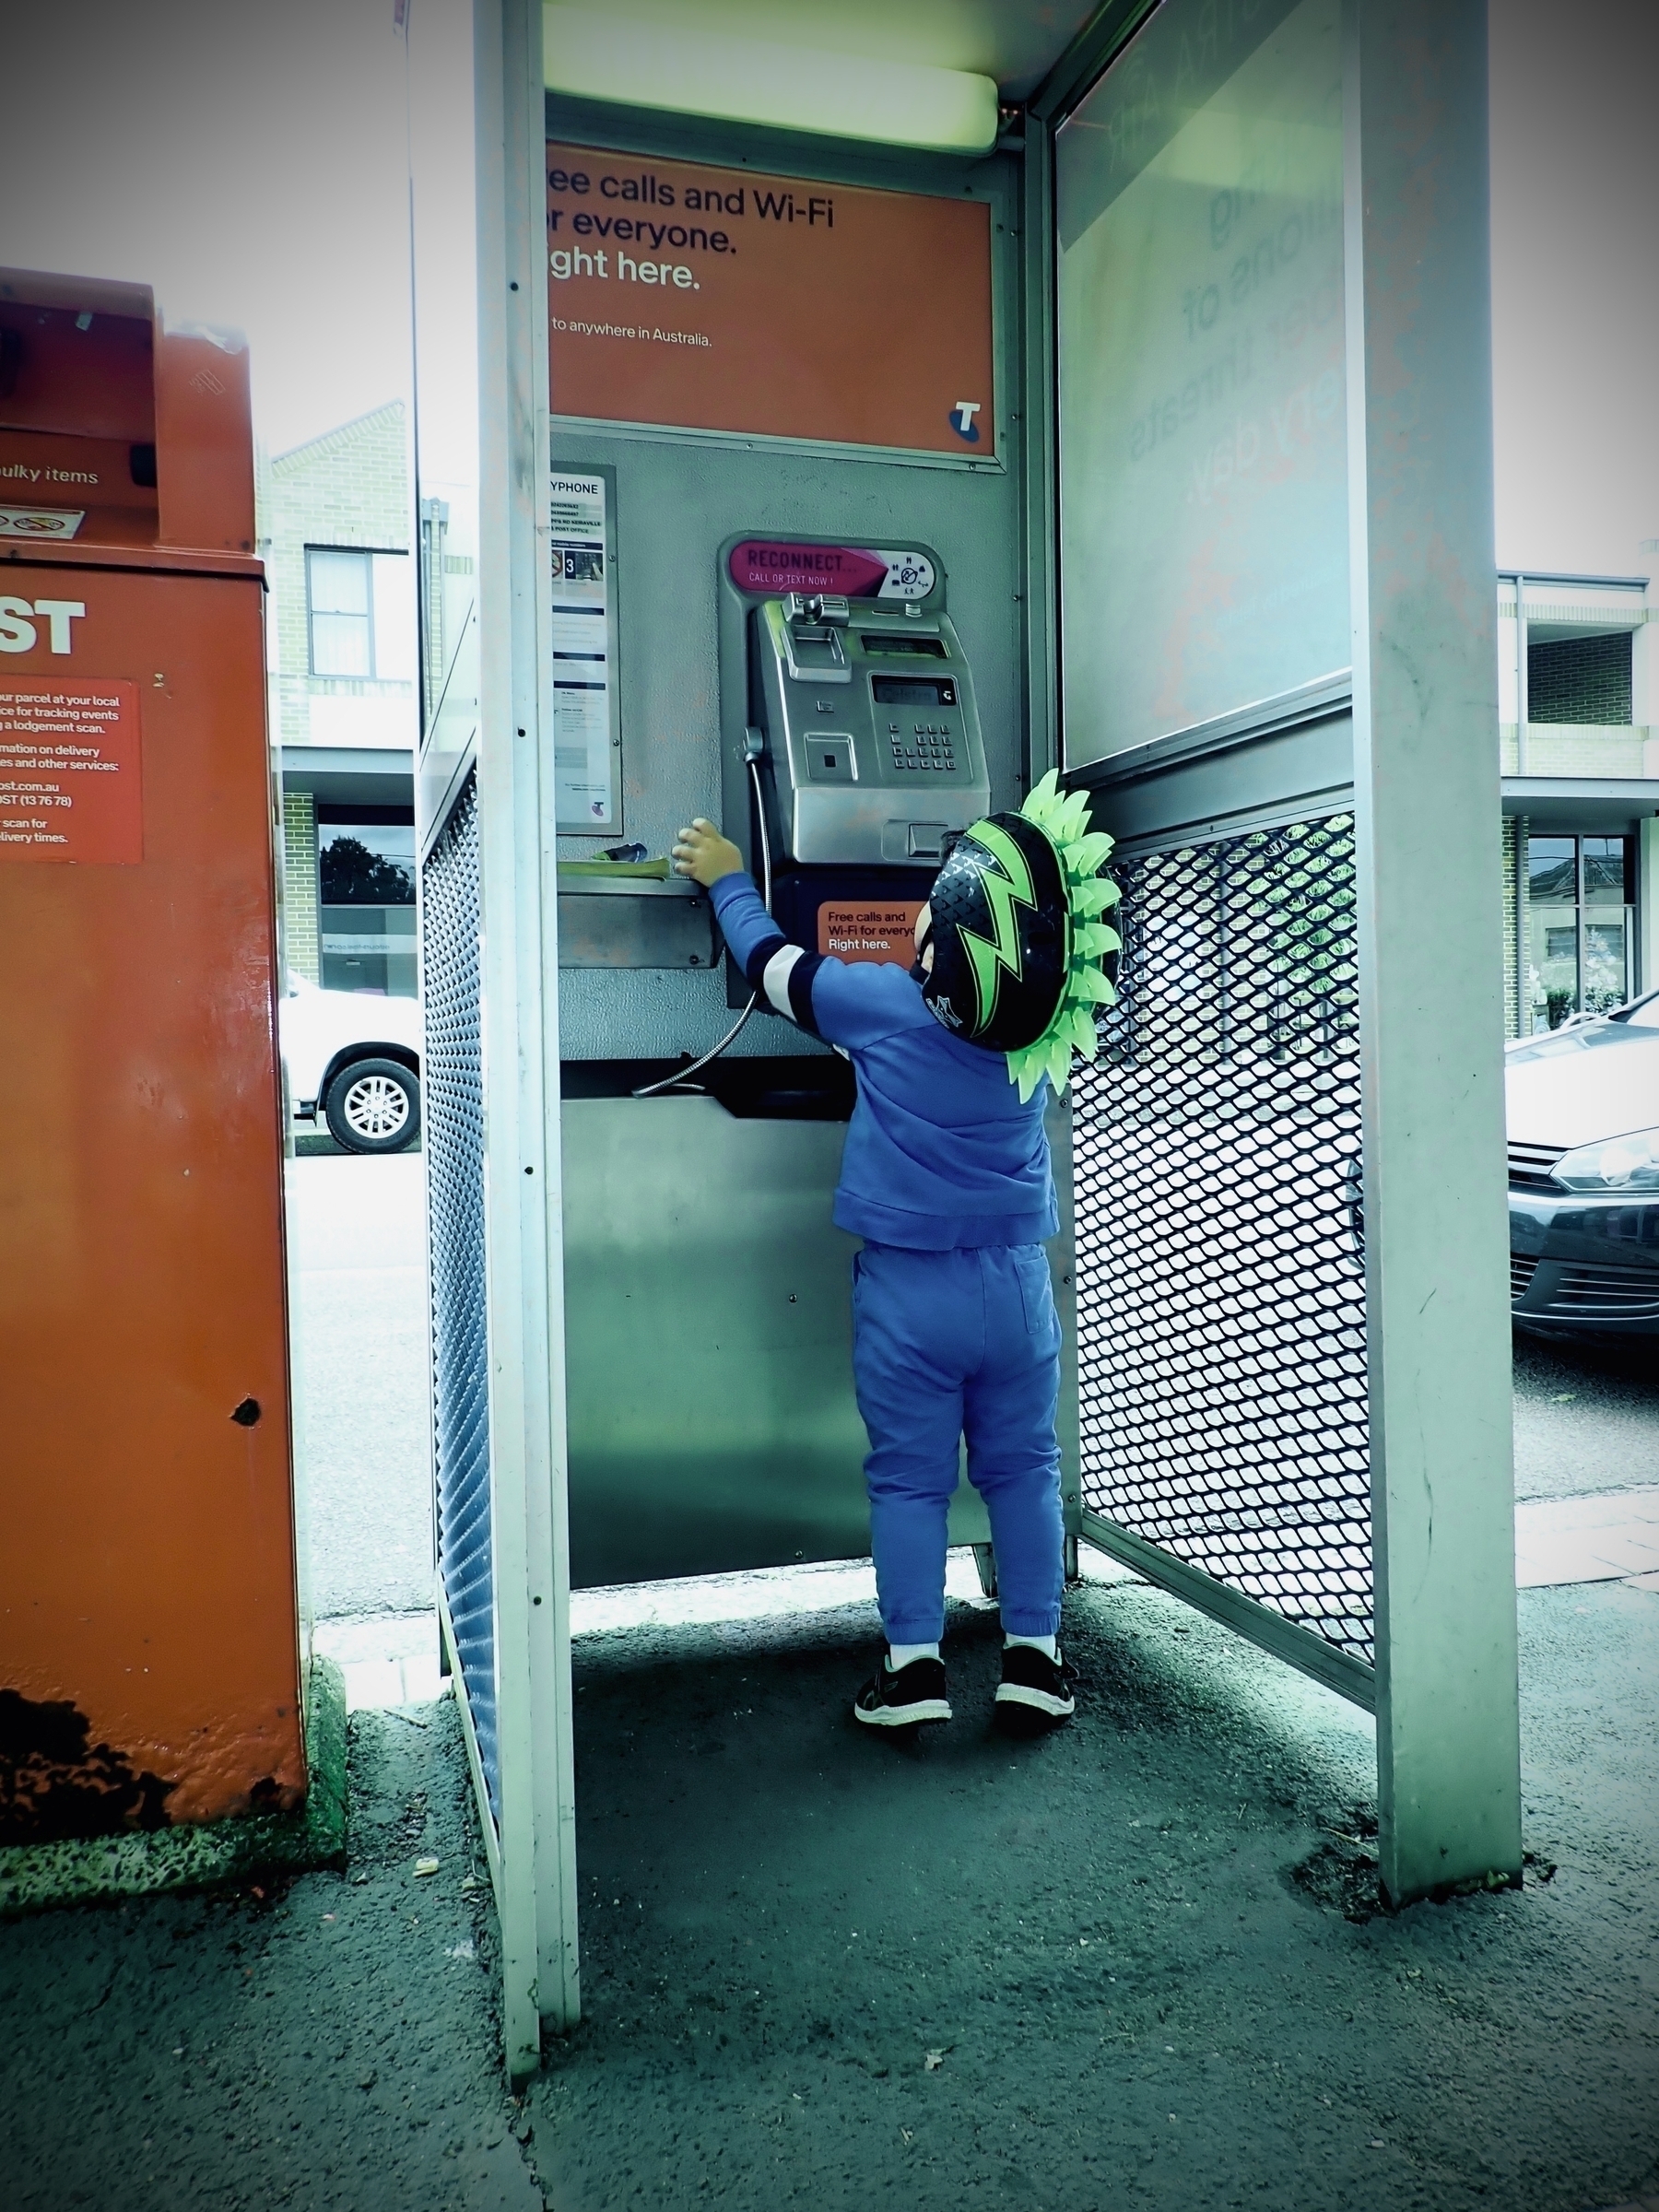 A young boy wears a spiky, green helmet in a phone booth.